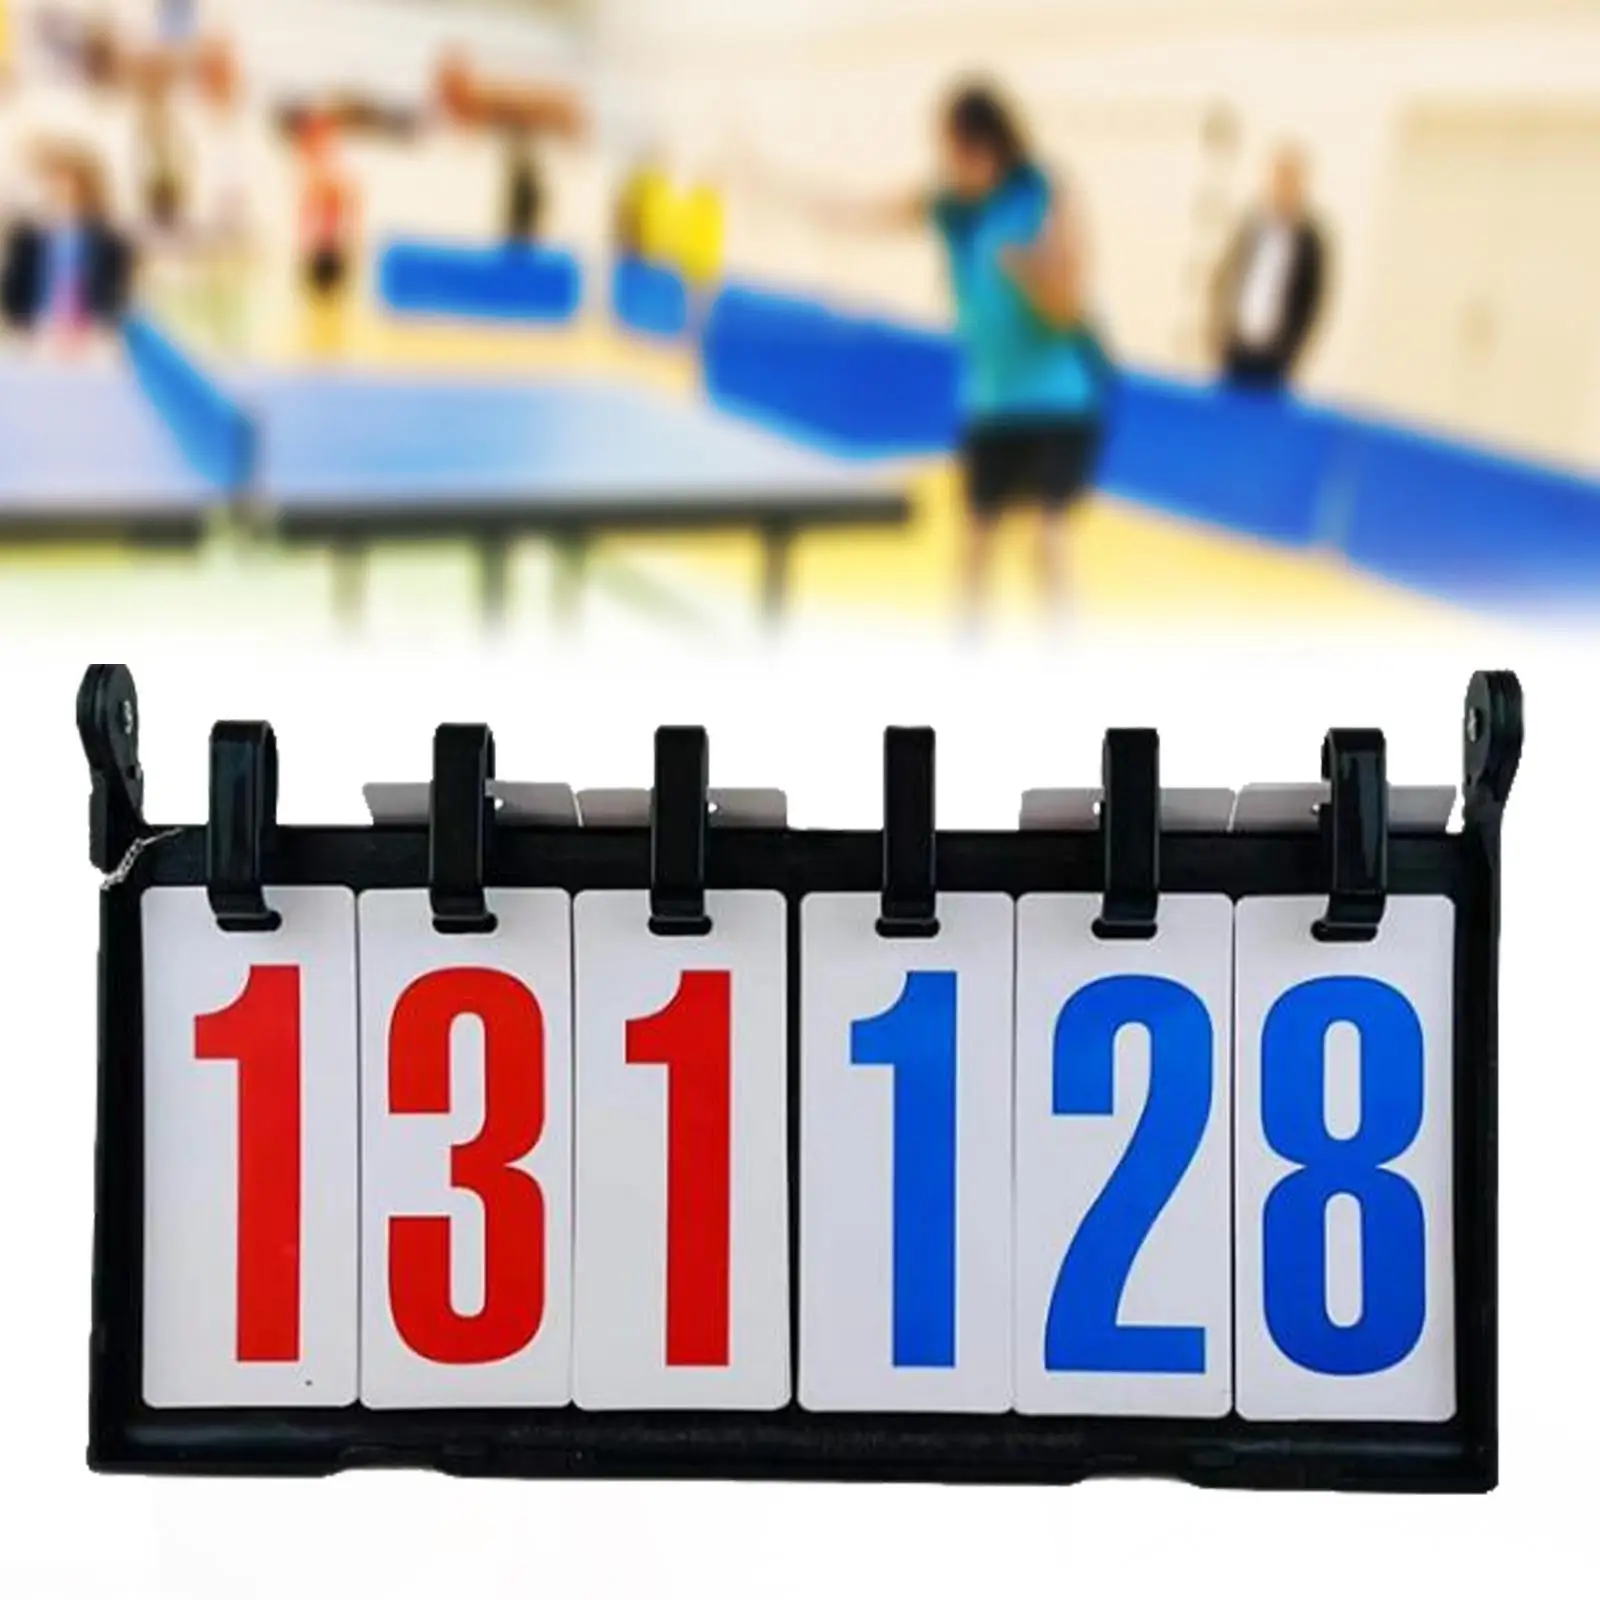 Table Scoreboard Portable 6 Digit Soccer Referee Competition Score Keeper for Table Tennis Indoor Badminton Basketball Outdoor